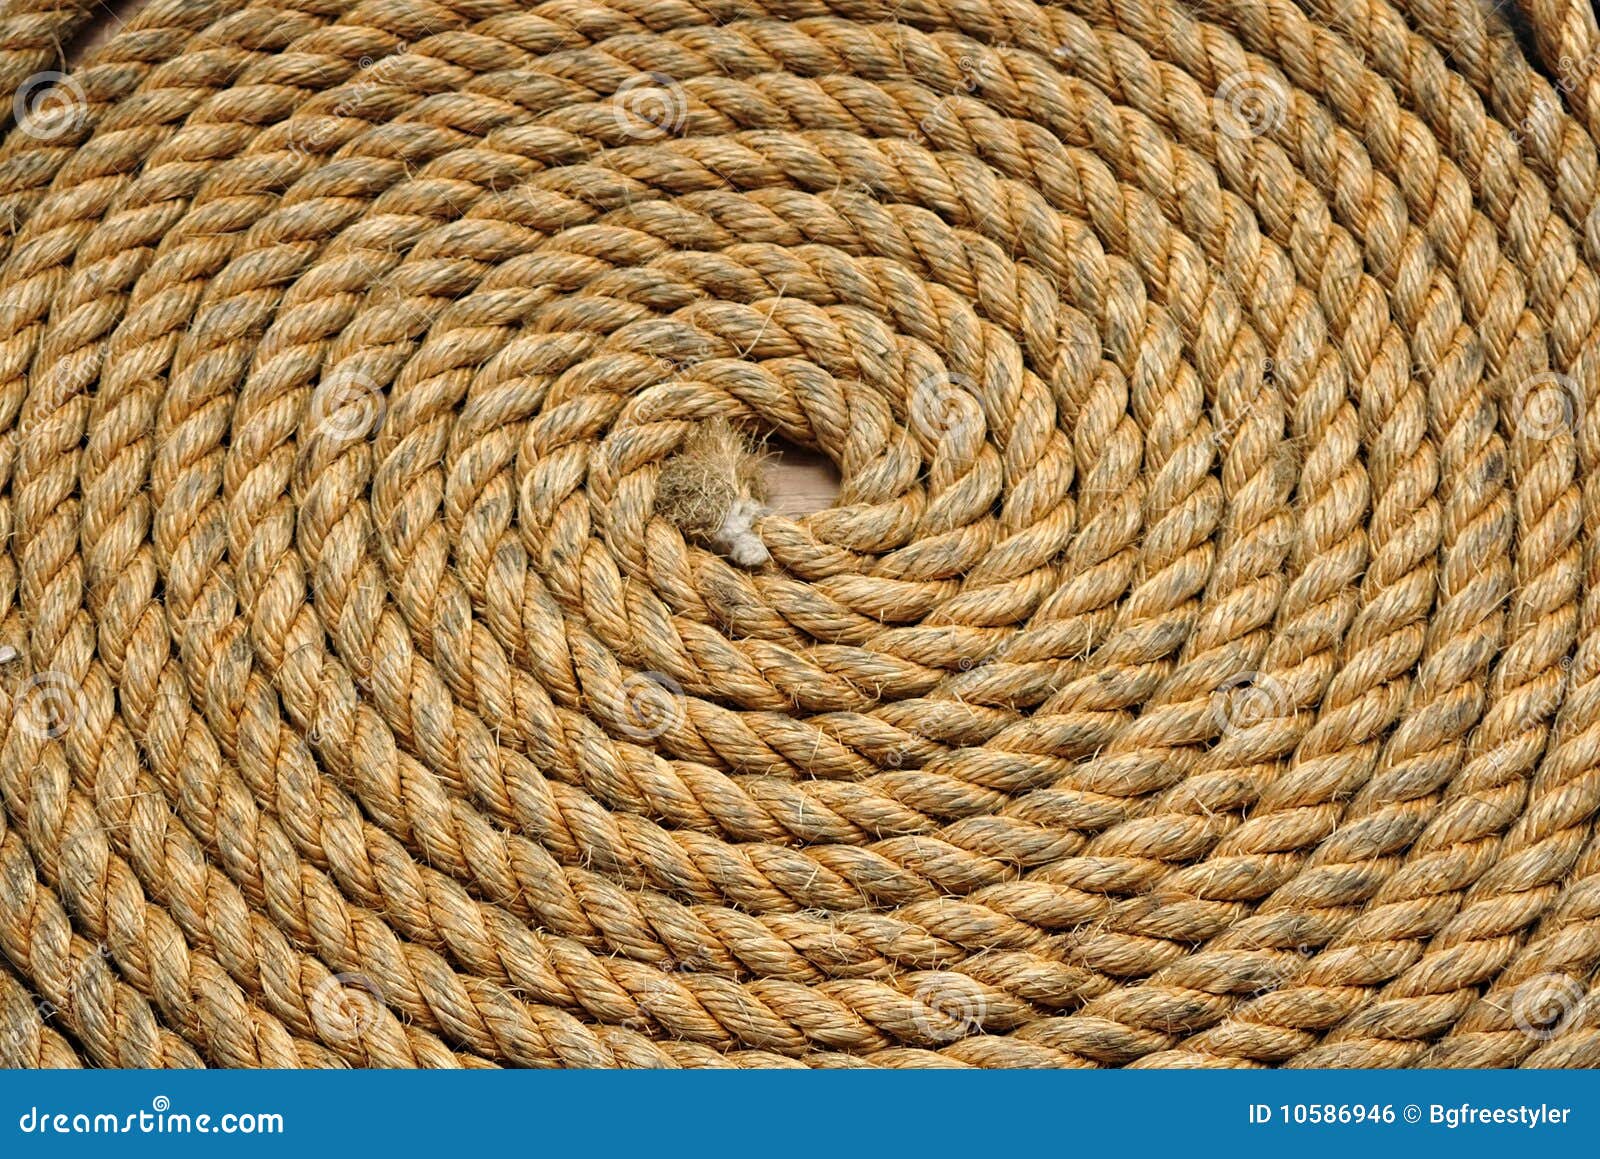 Heavy Duty Yellow Coiled Rope Stock Photo - Image of path, fiber: 10586946